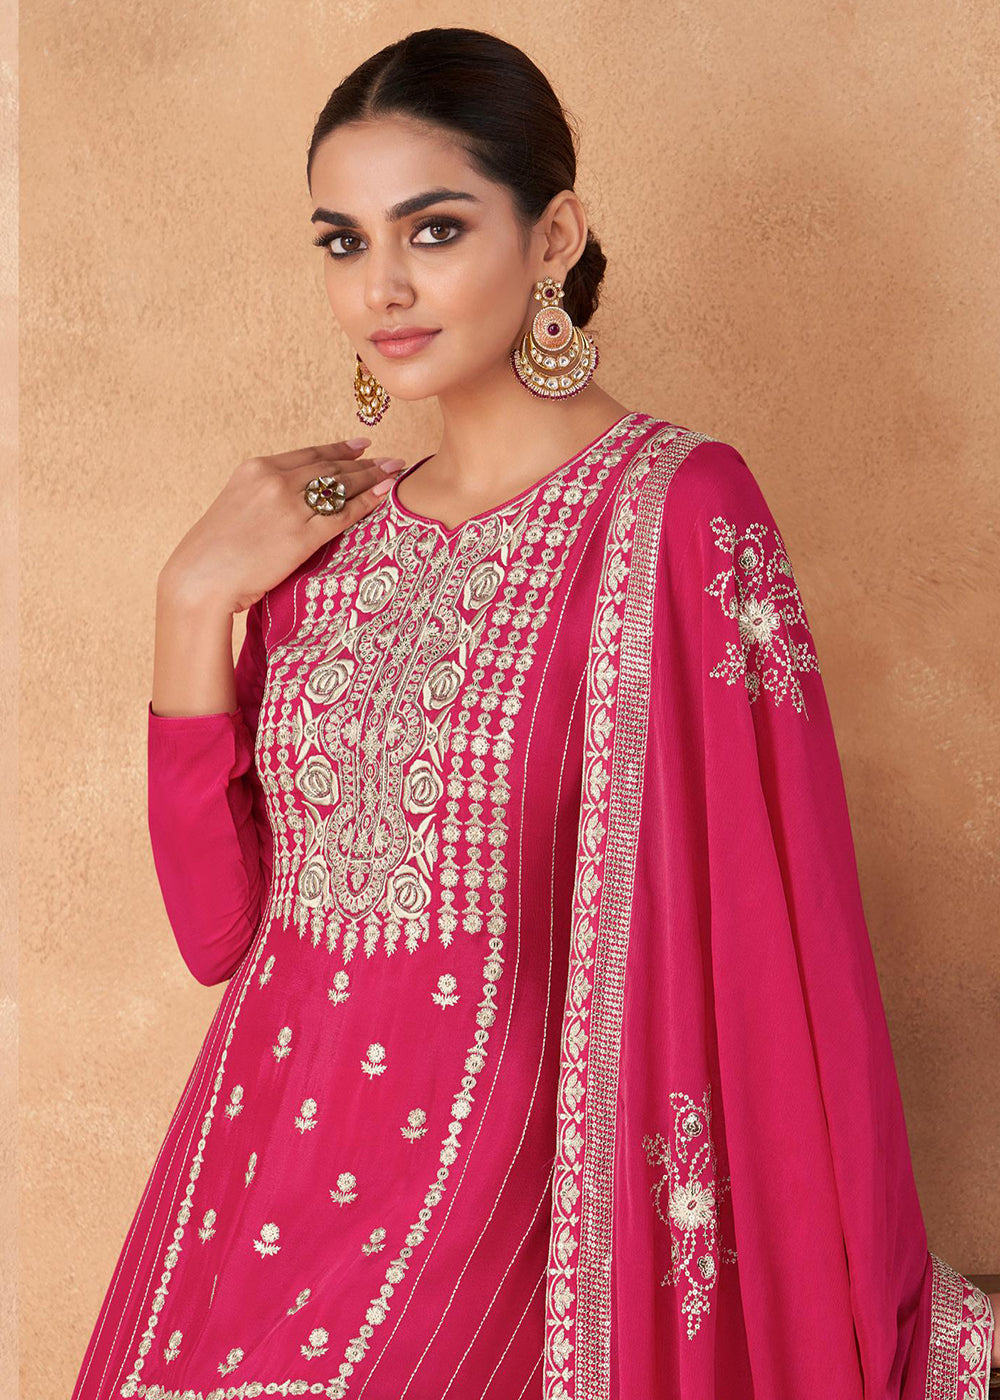 Buy Now Palazzo Style Hot Pink Georgette & Chinon Salwar Suit Online in USA, UK, Canada, Germany, Australia & Worldwide at Empress Clothing.